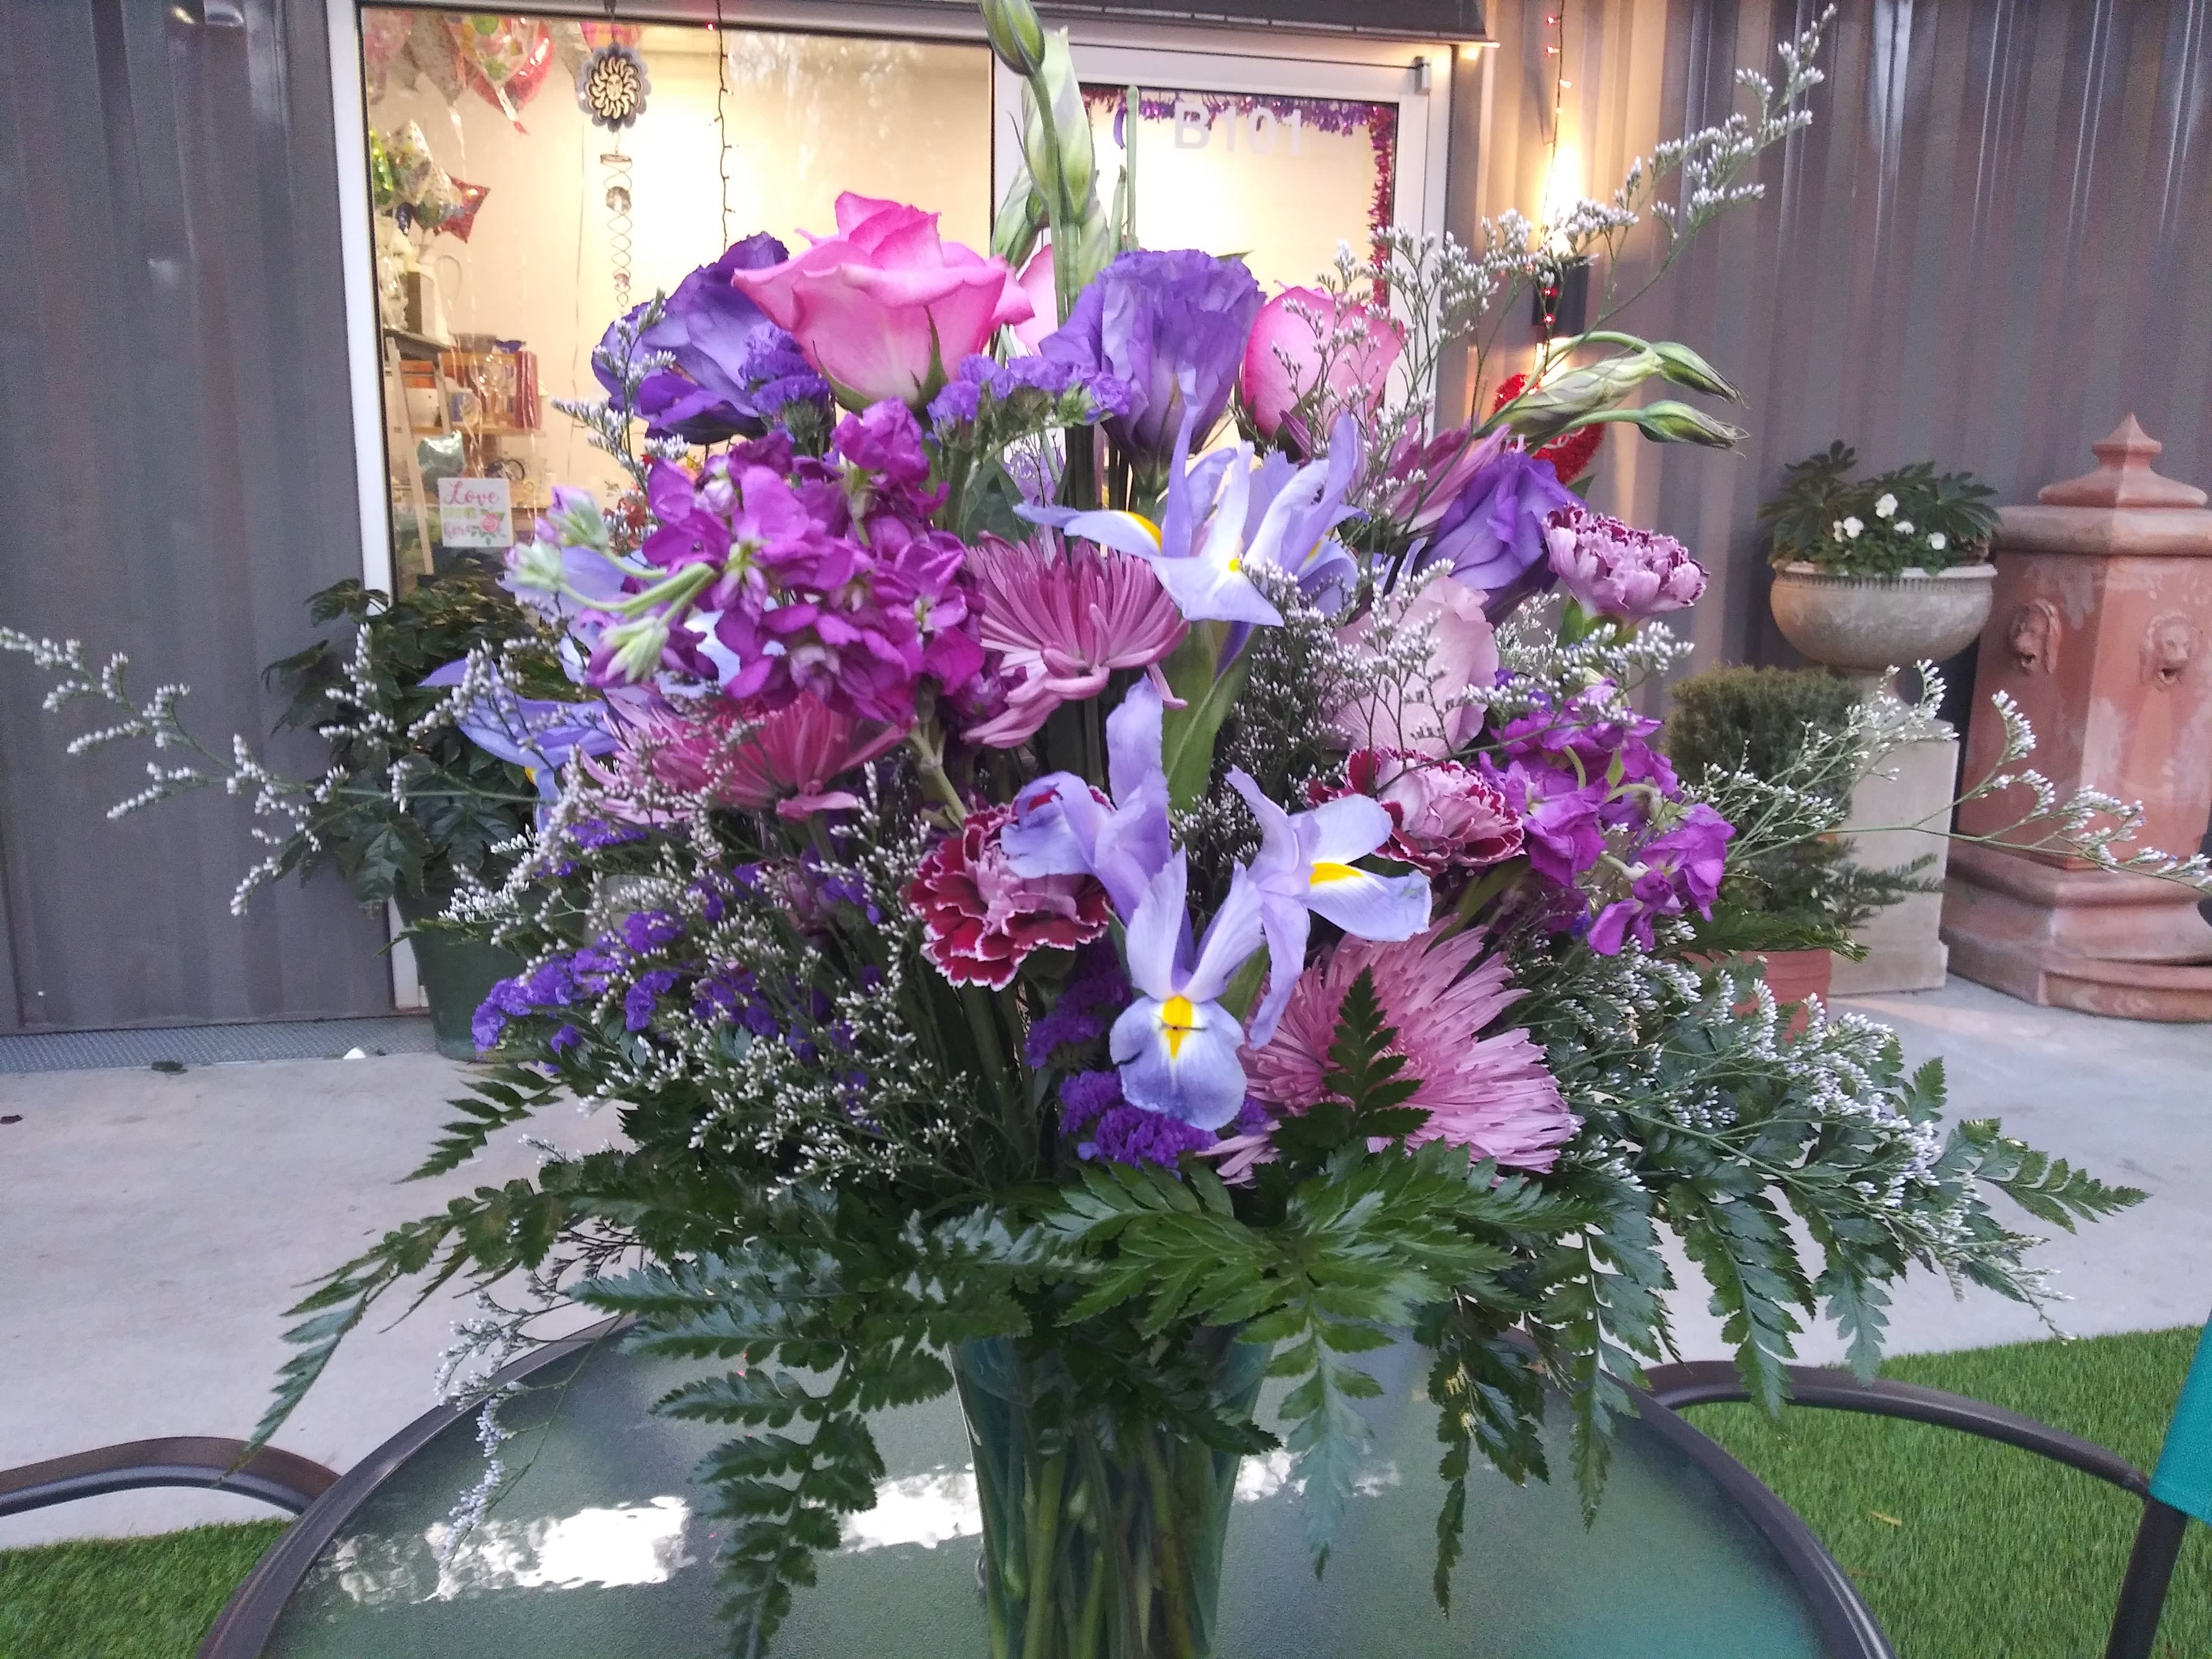 Nile Valley - An ode to the Phoenicians of Crete with an intoxicating arrangement of lavender Roses, Lisianthus, Alstroemeria, Iris, Carnations, spider Mums, Statice, Caspia and greenery in a clear vase. A Premium Bouquet is pictured.